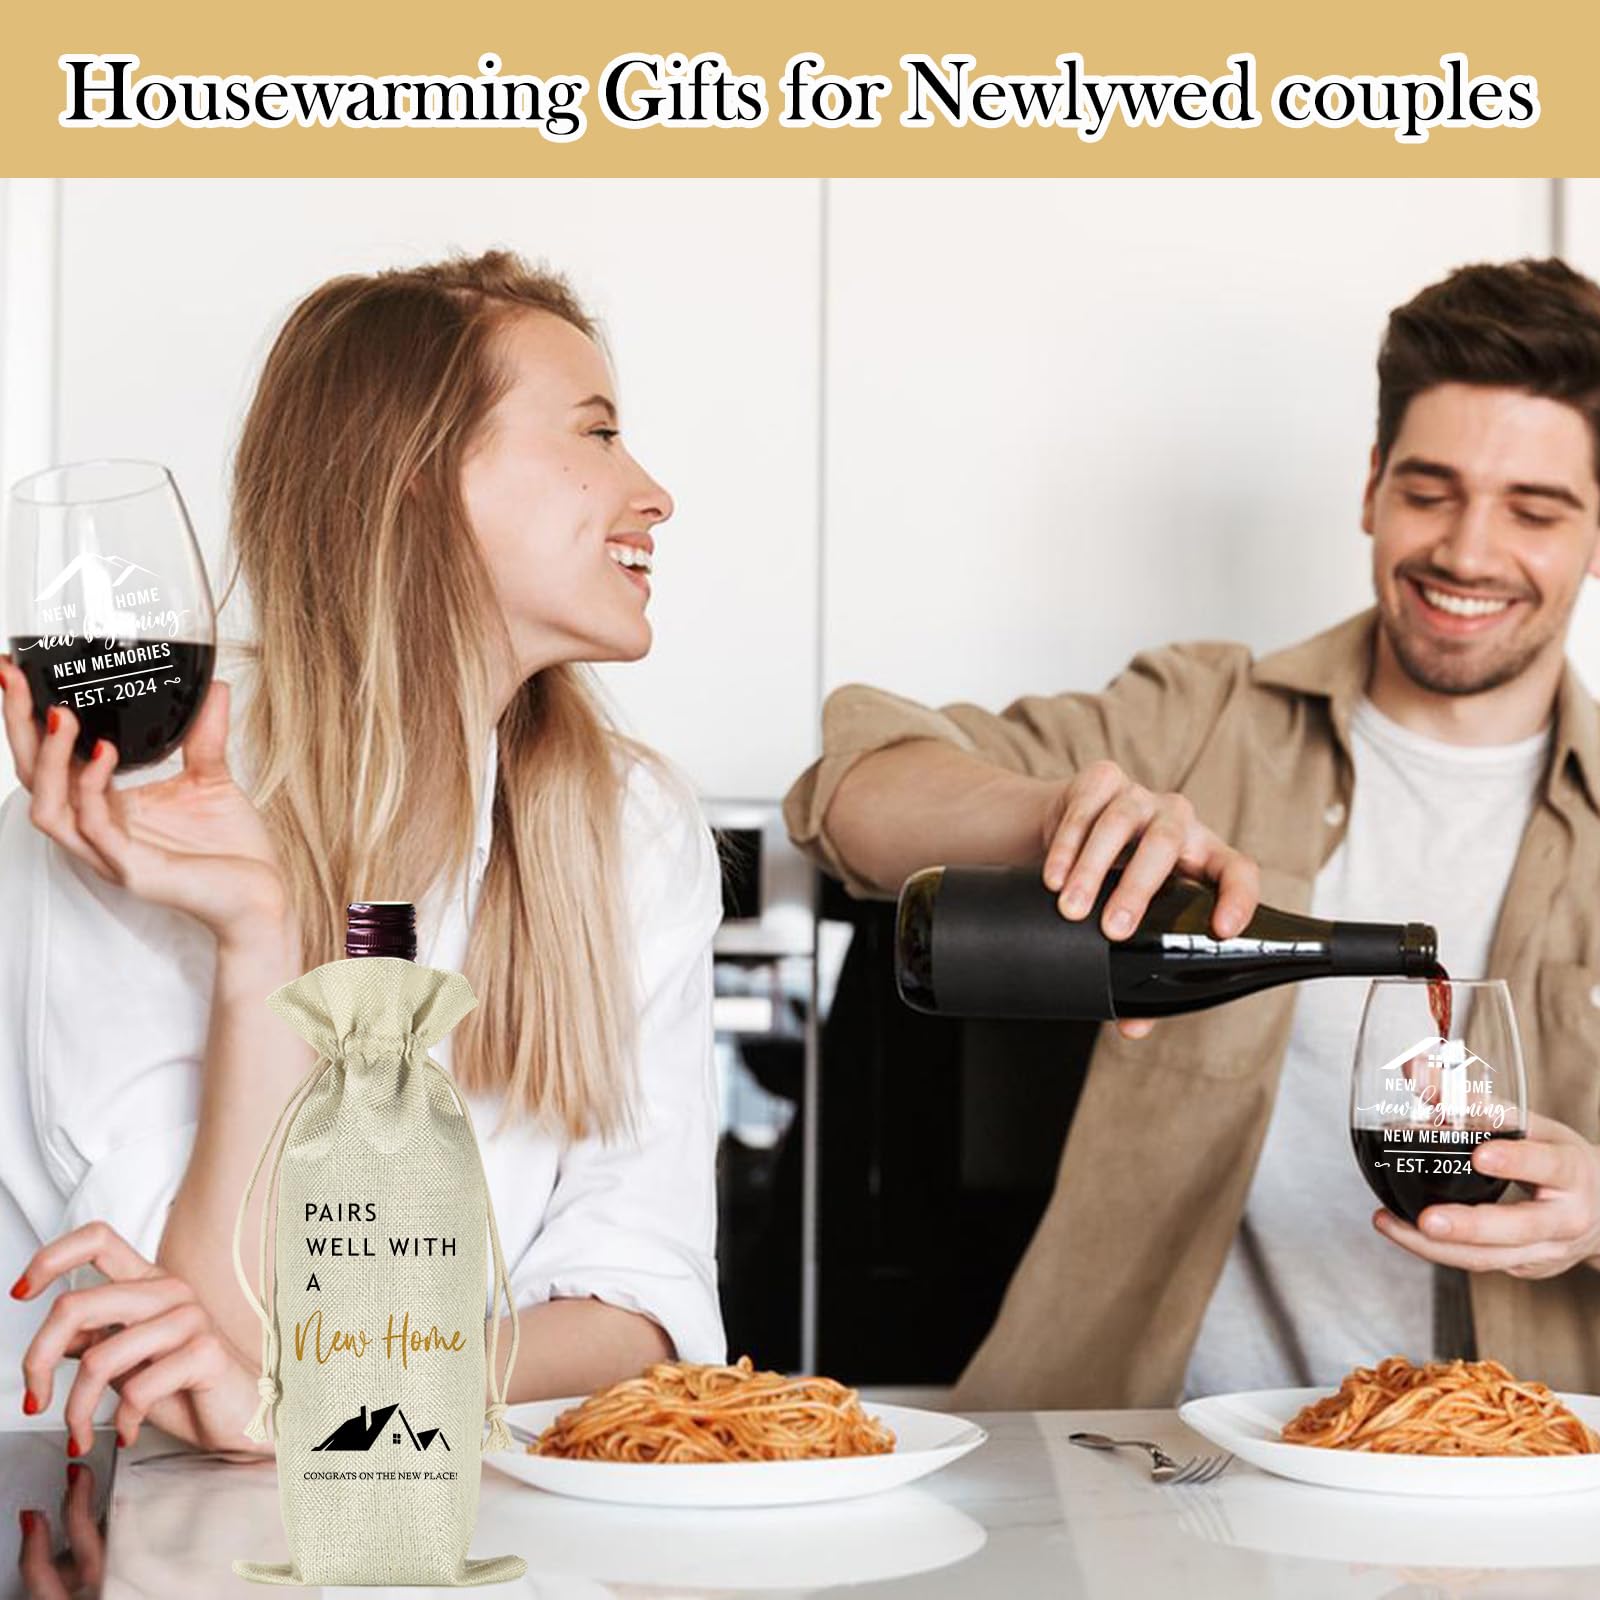 House Warming Gifts New Home, Housewarming gifts for New House, New Home Gifts for Home, Housewarming gift Stemless Wine Glass & Bottle Gift Bag Set for Newlywed Couple, Friends (2 Glasses, 1 Bag)